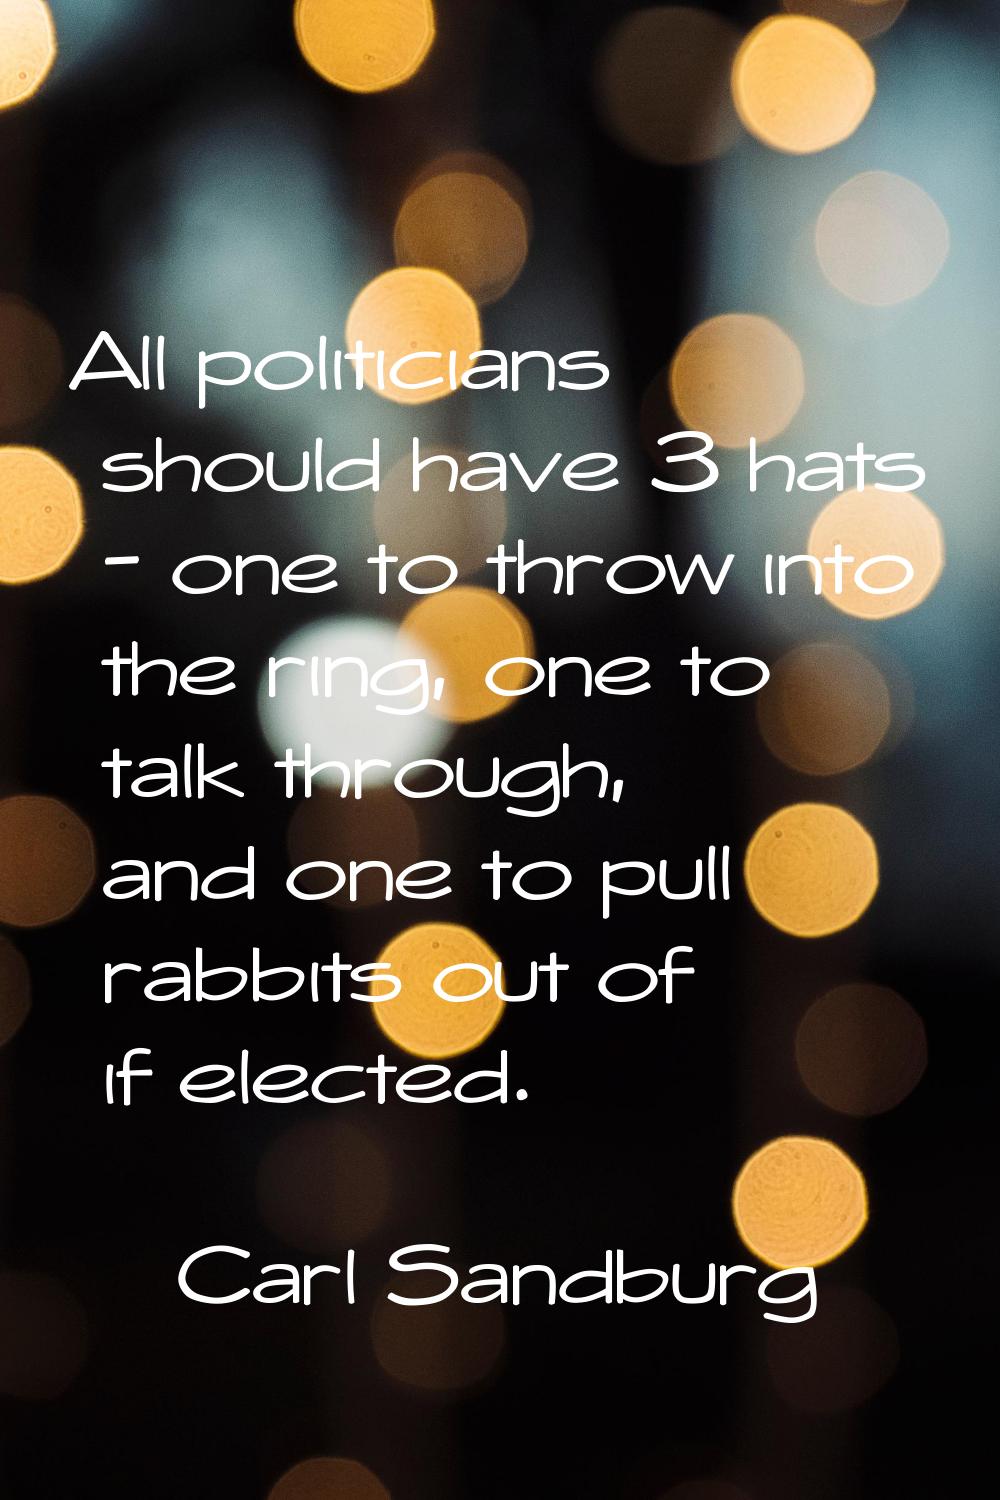 All politicians should have 3 hats - one to throw into the ring, one to talk through, and one to pu